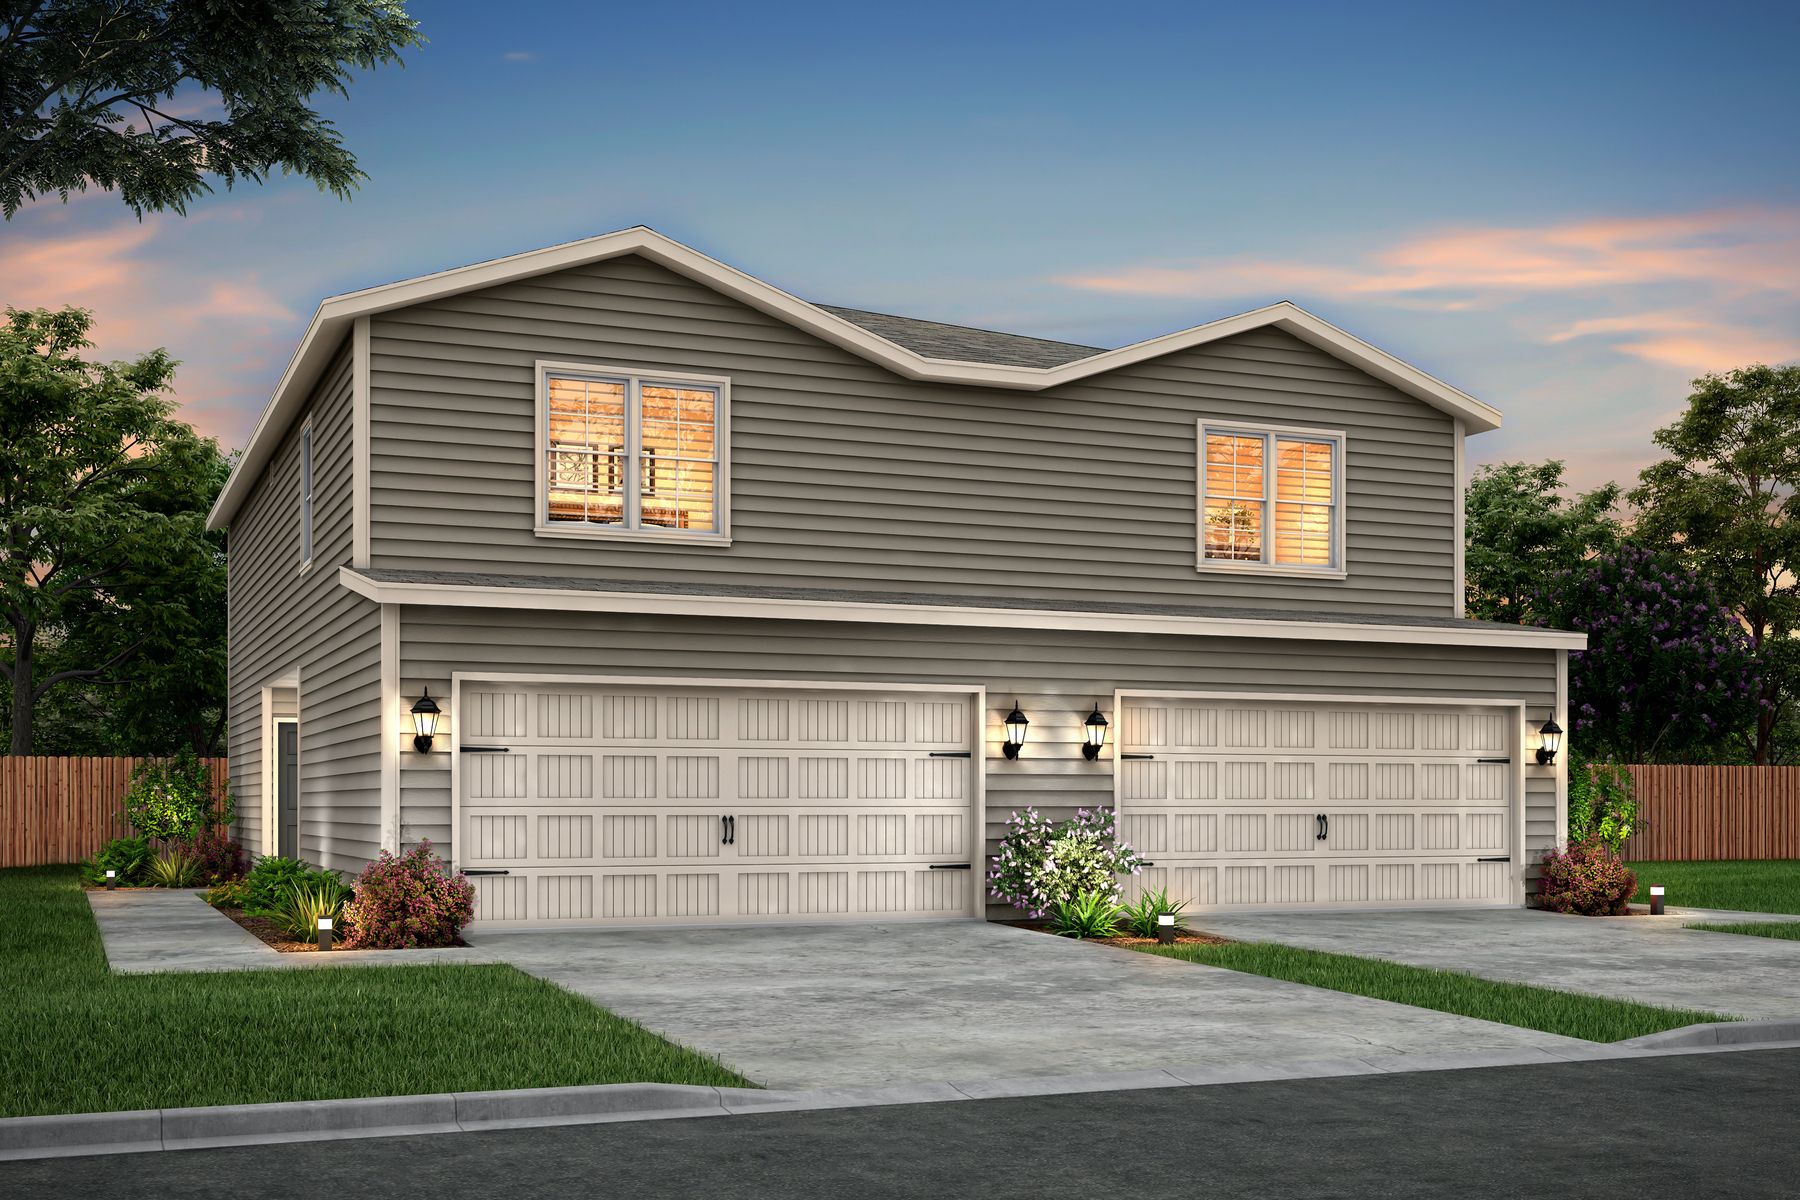 LGI Homes at South Park Meadows:The Douglas plan is a brand-new townhome designed exclusively for South Park Meadows!